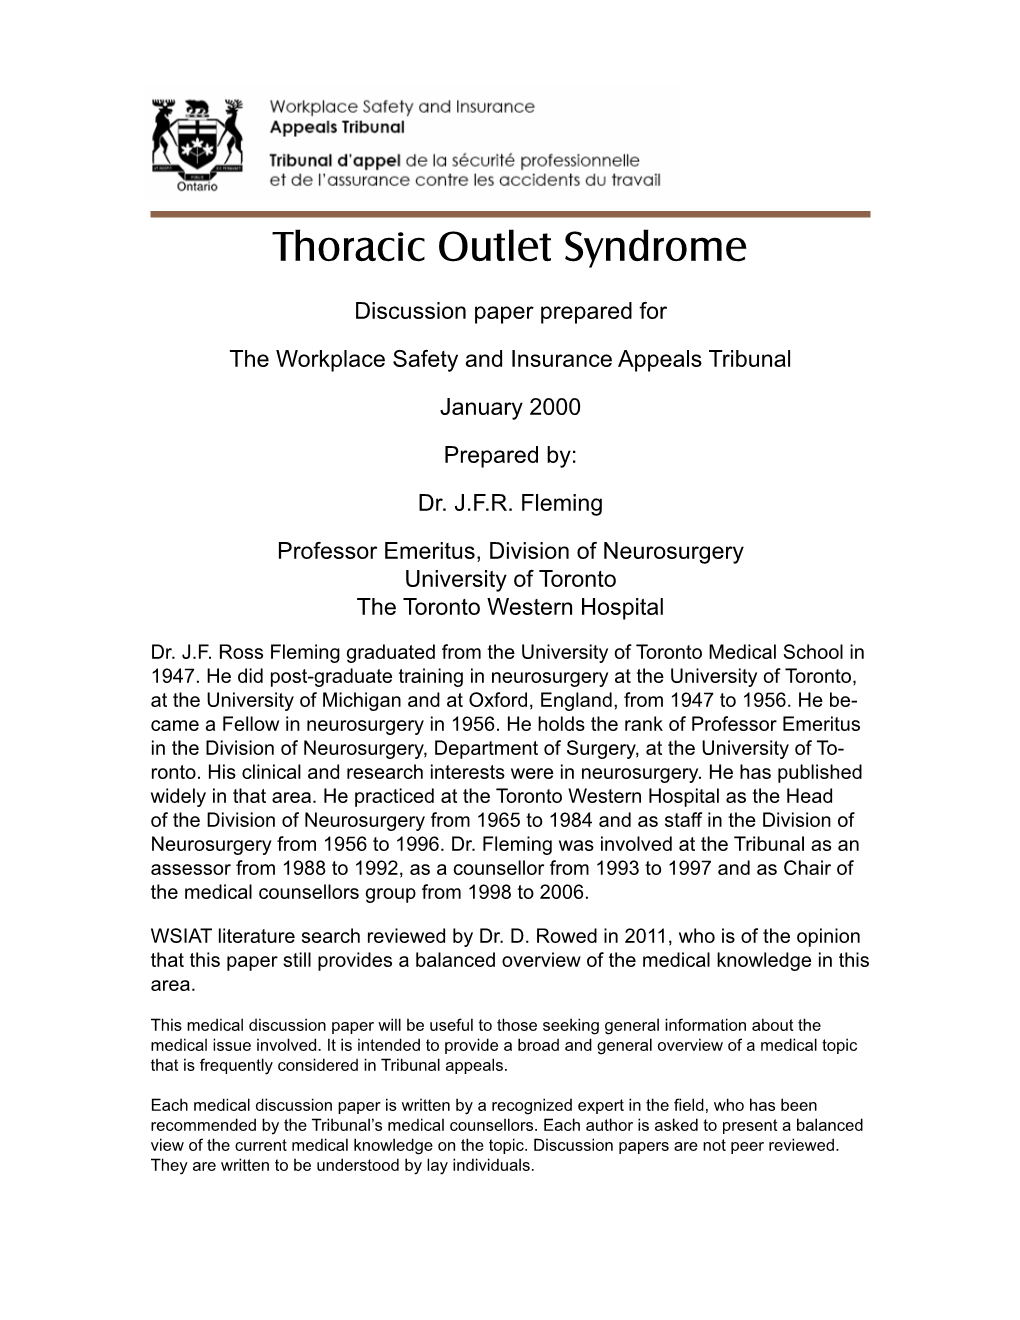 Thoracic Outlet Syndrome WSIAT Medical Discussion Paper